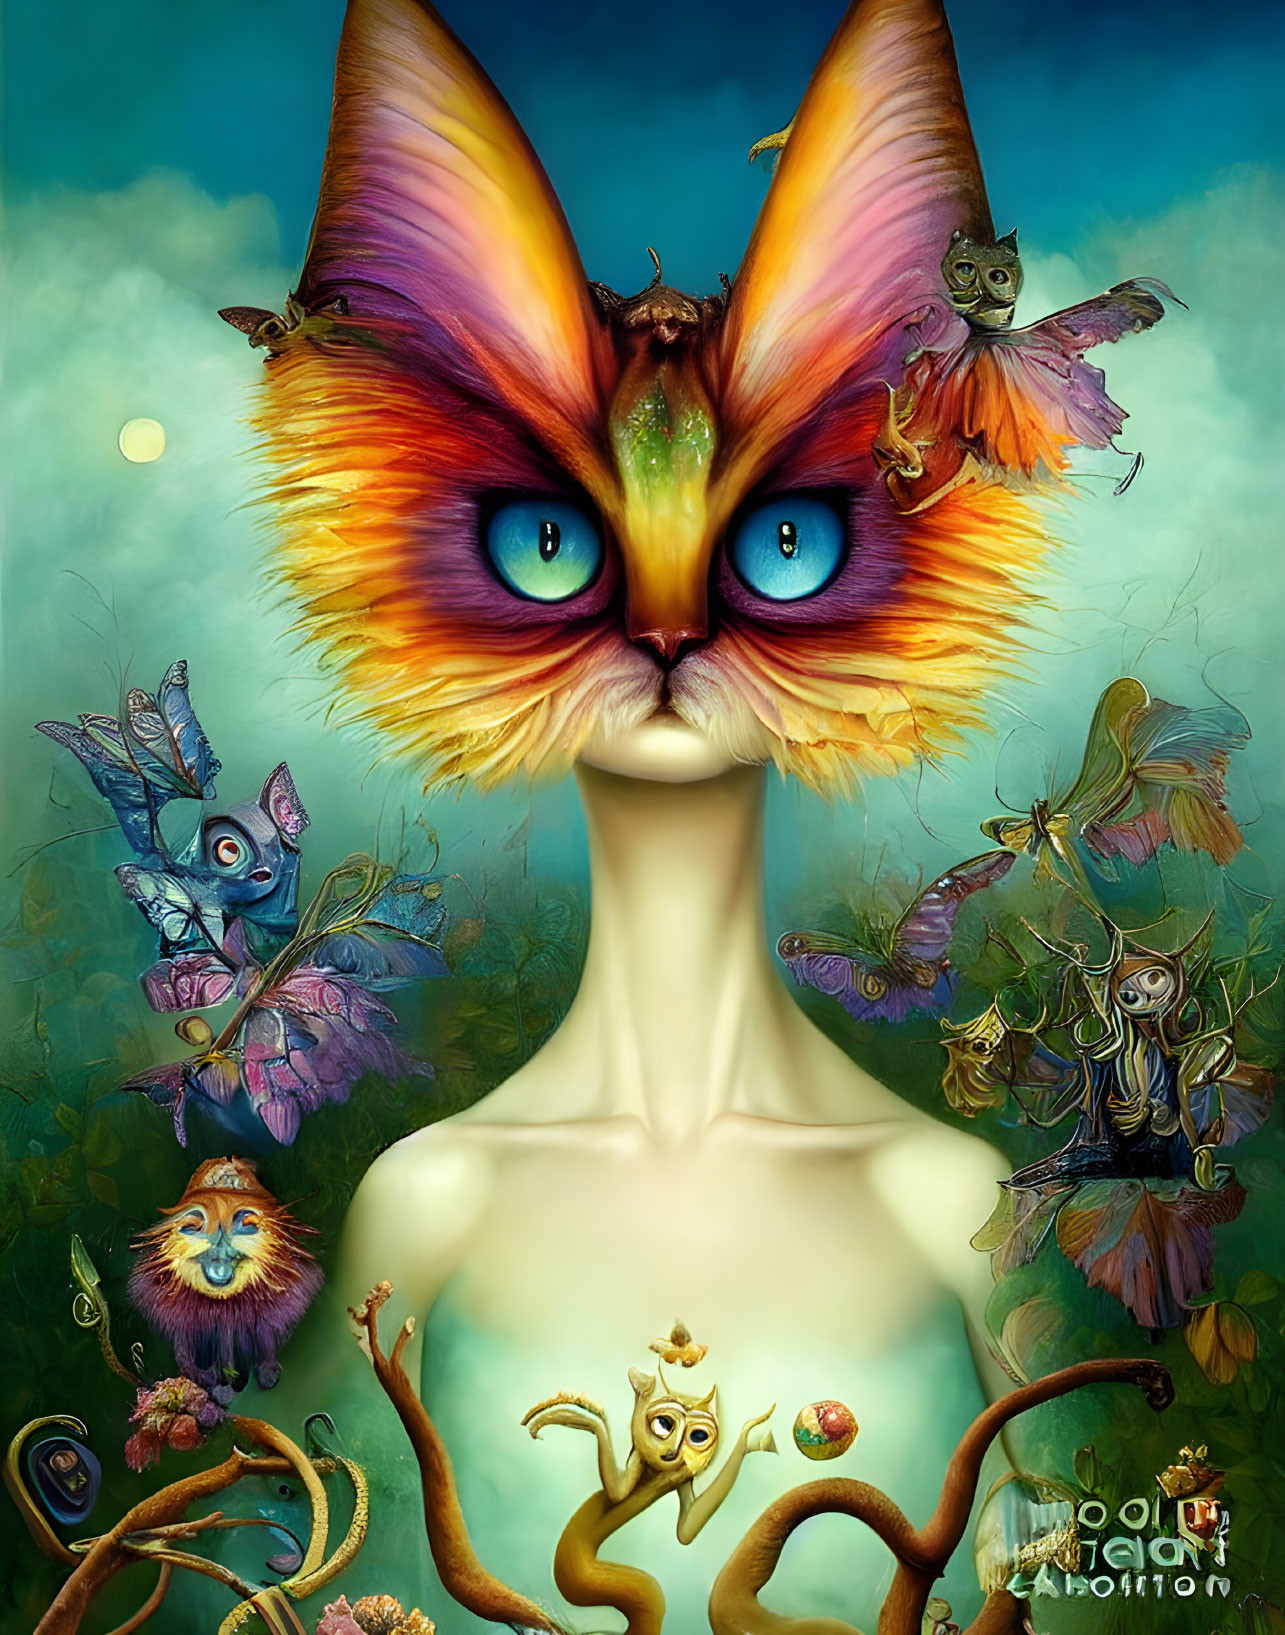 Colorful surreal digital painting: Butterfly-headed figure in whimsical scene